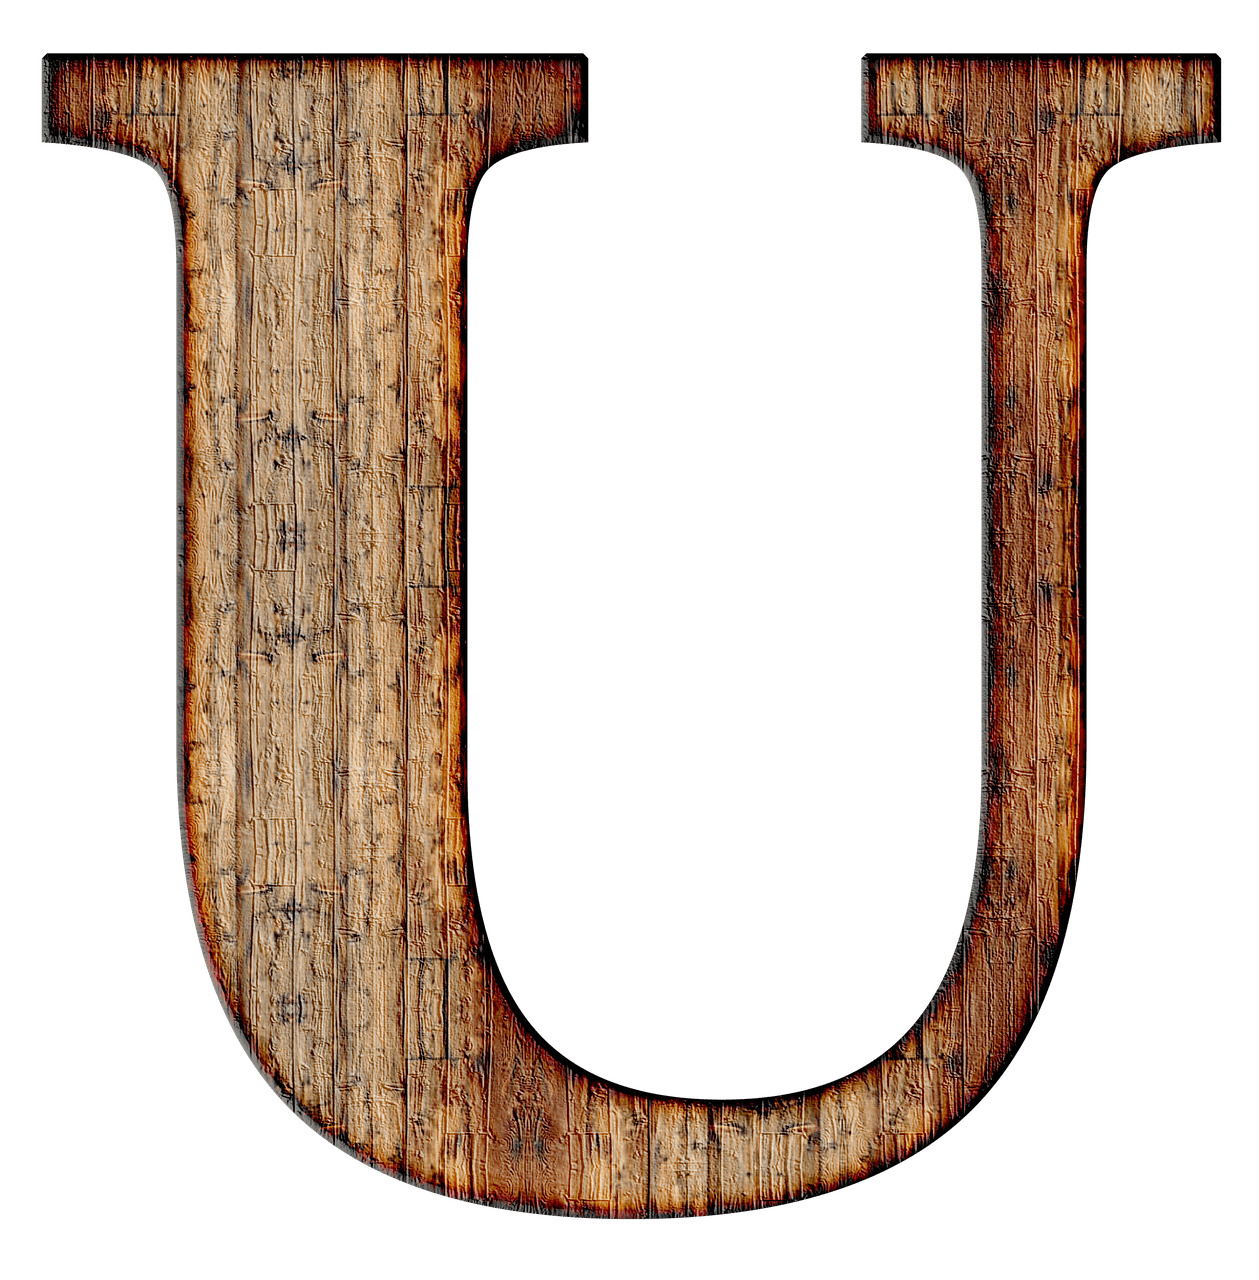 Wooden Capital Letter U icons